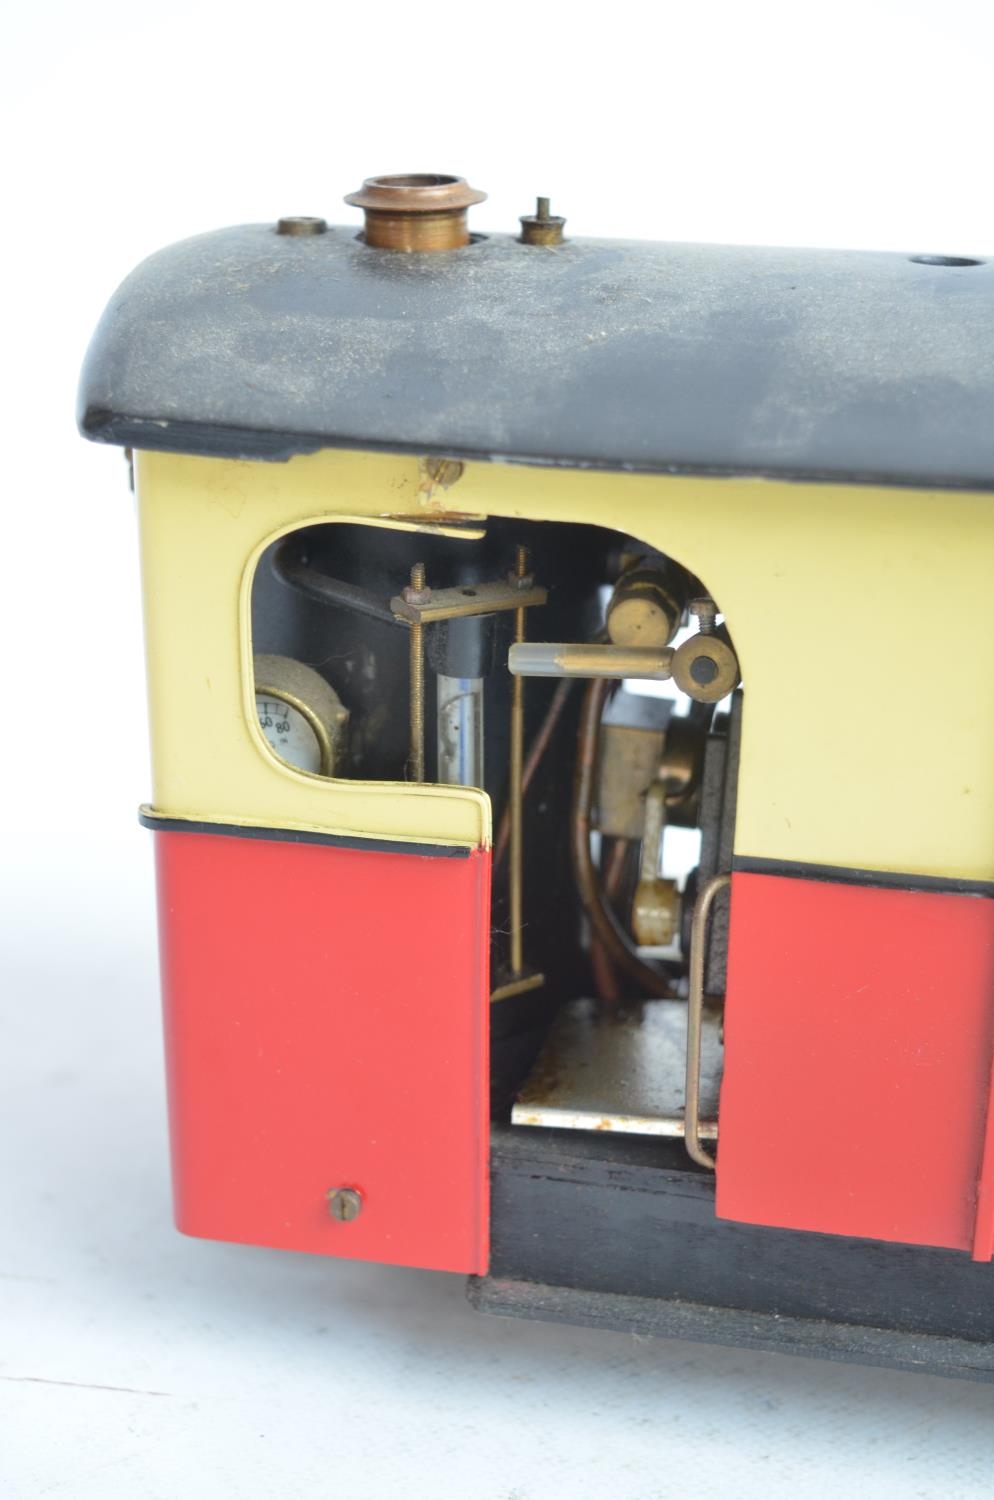 32mm G gauge outdoor metal narrow railcar model steam locomotive with added remote control - Image 3 of 8